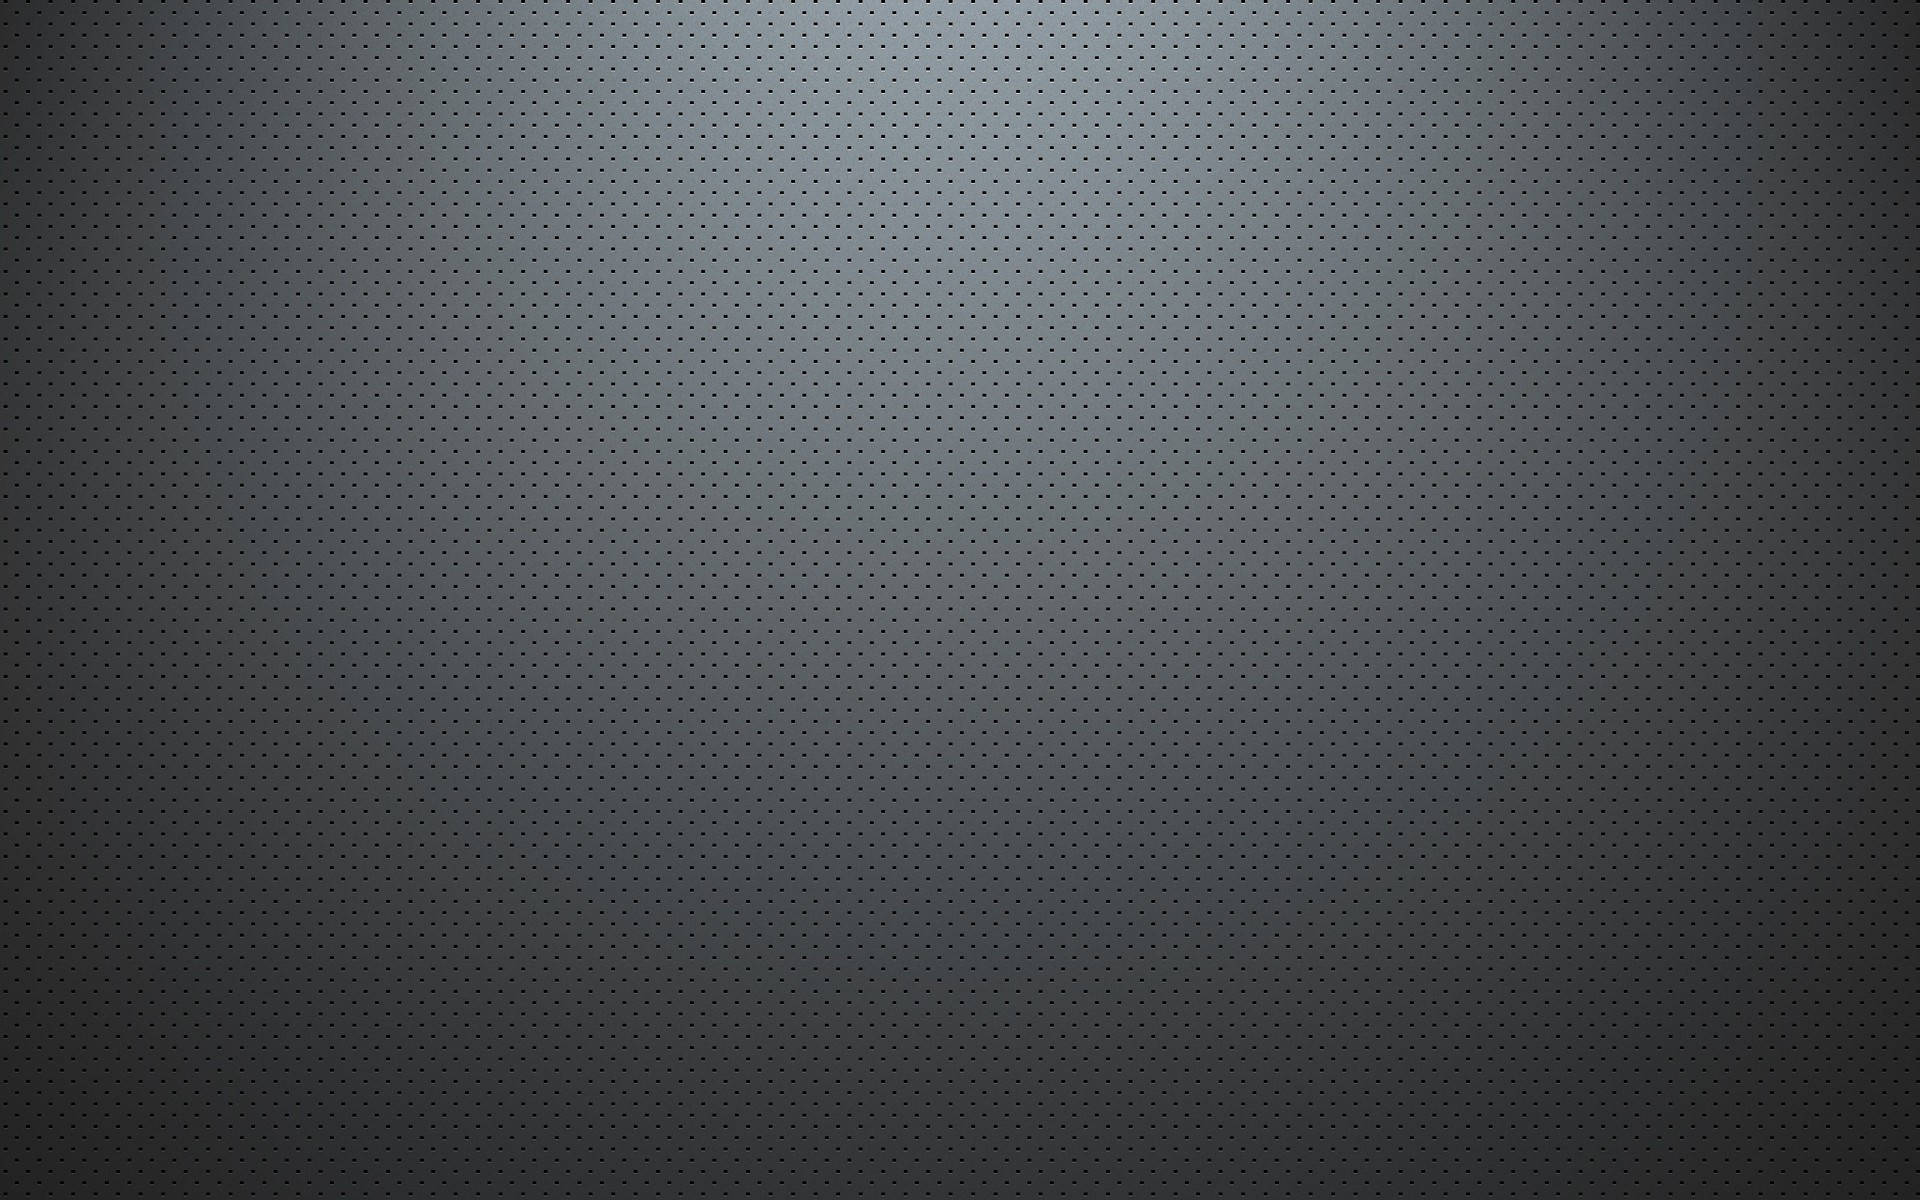 Grained Metal Texture Background